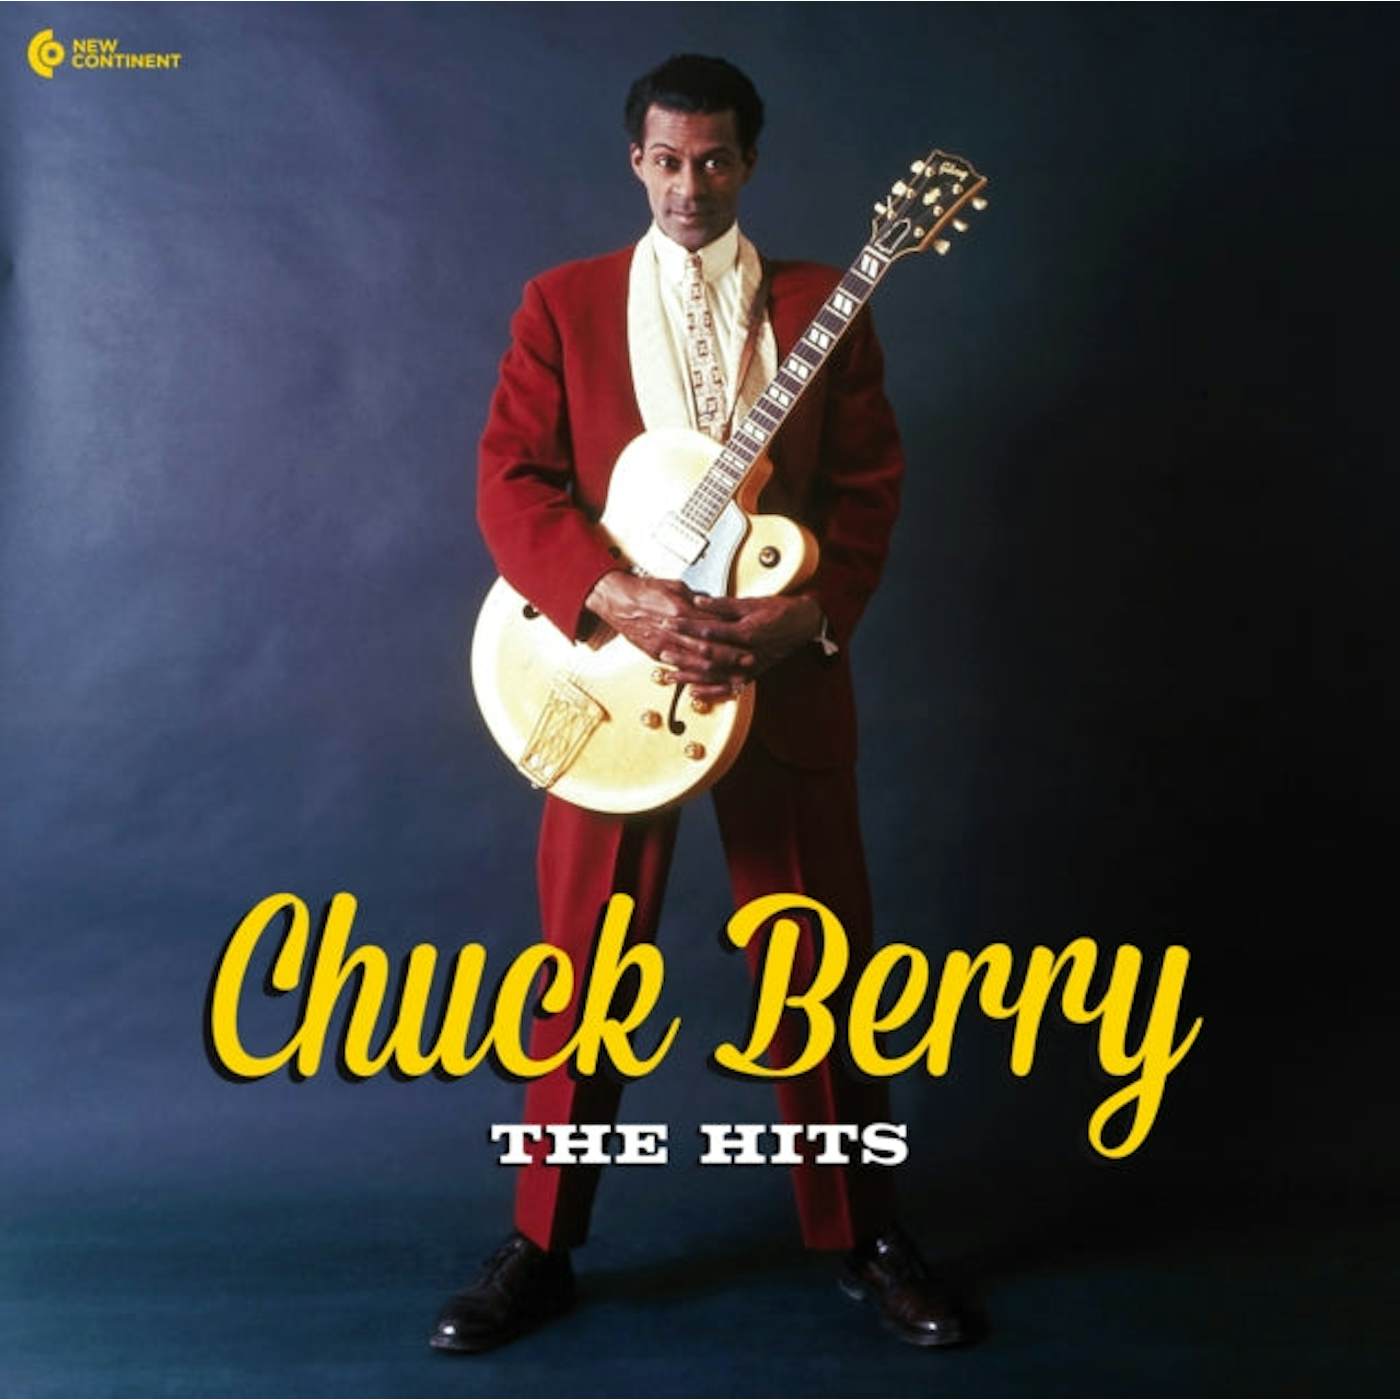 Chuck Berry LP Vinyl Record - The Hits (Limited Edition)